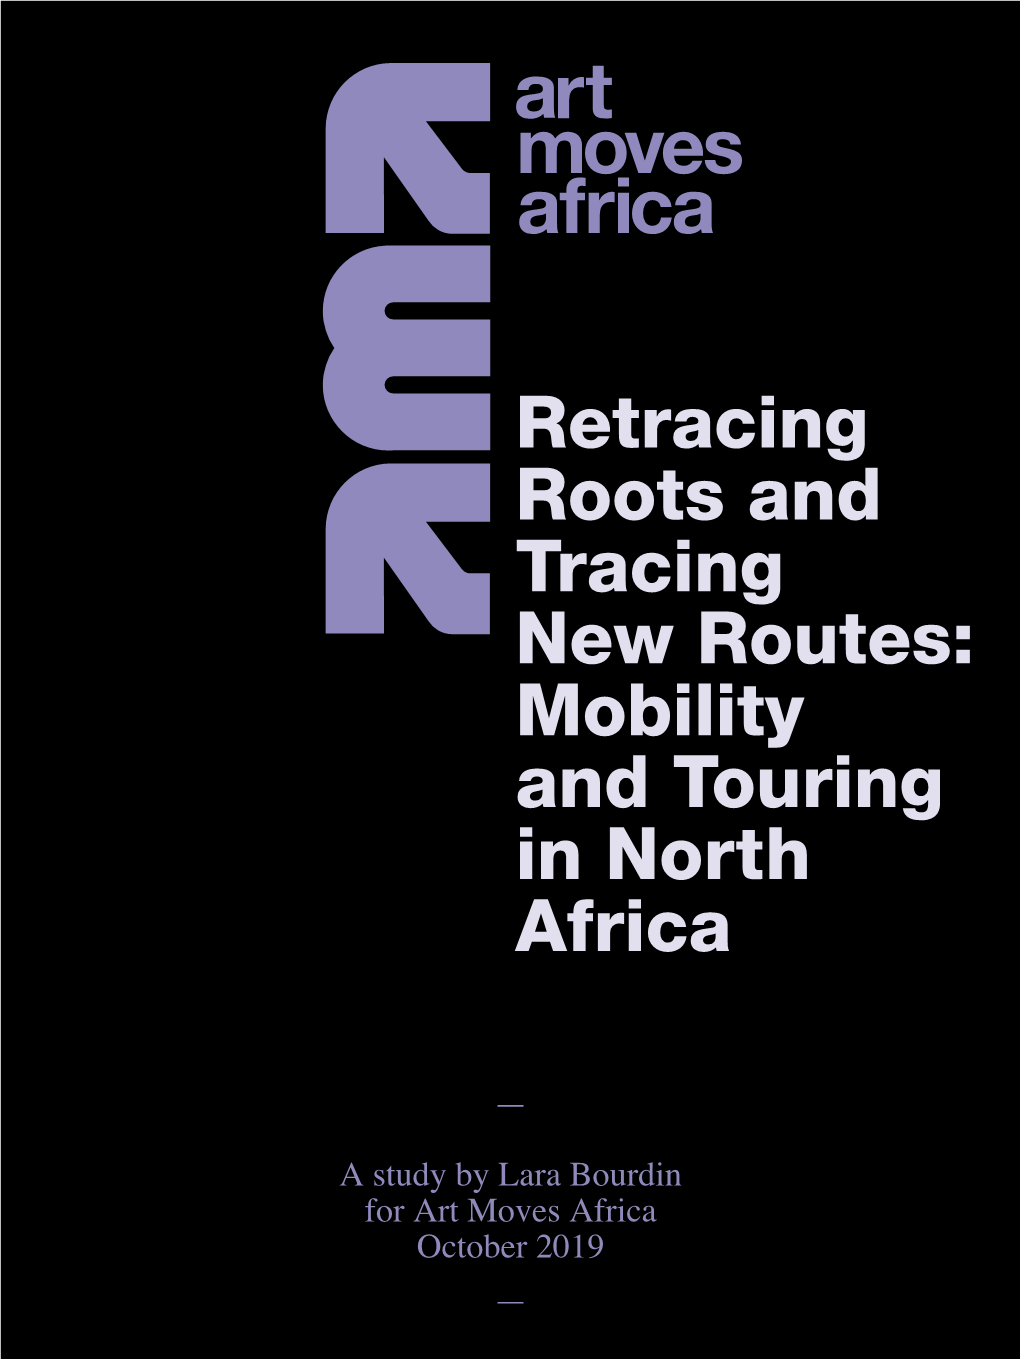 Retracing Roots and Tracing New Routes: Mobility and Touring in North Africa